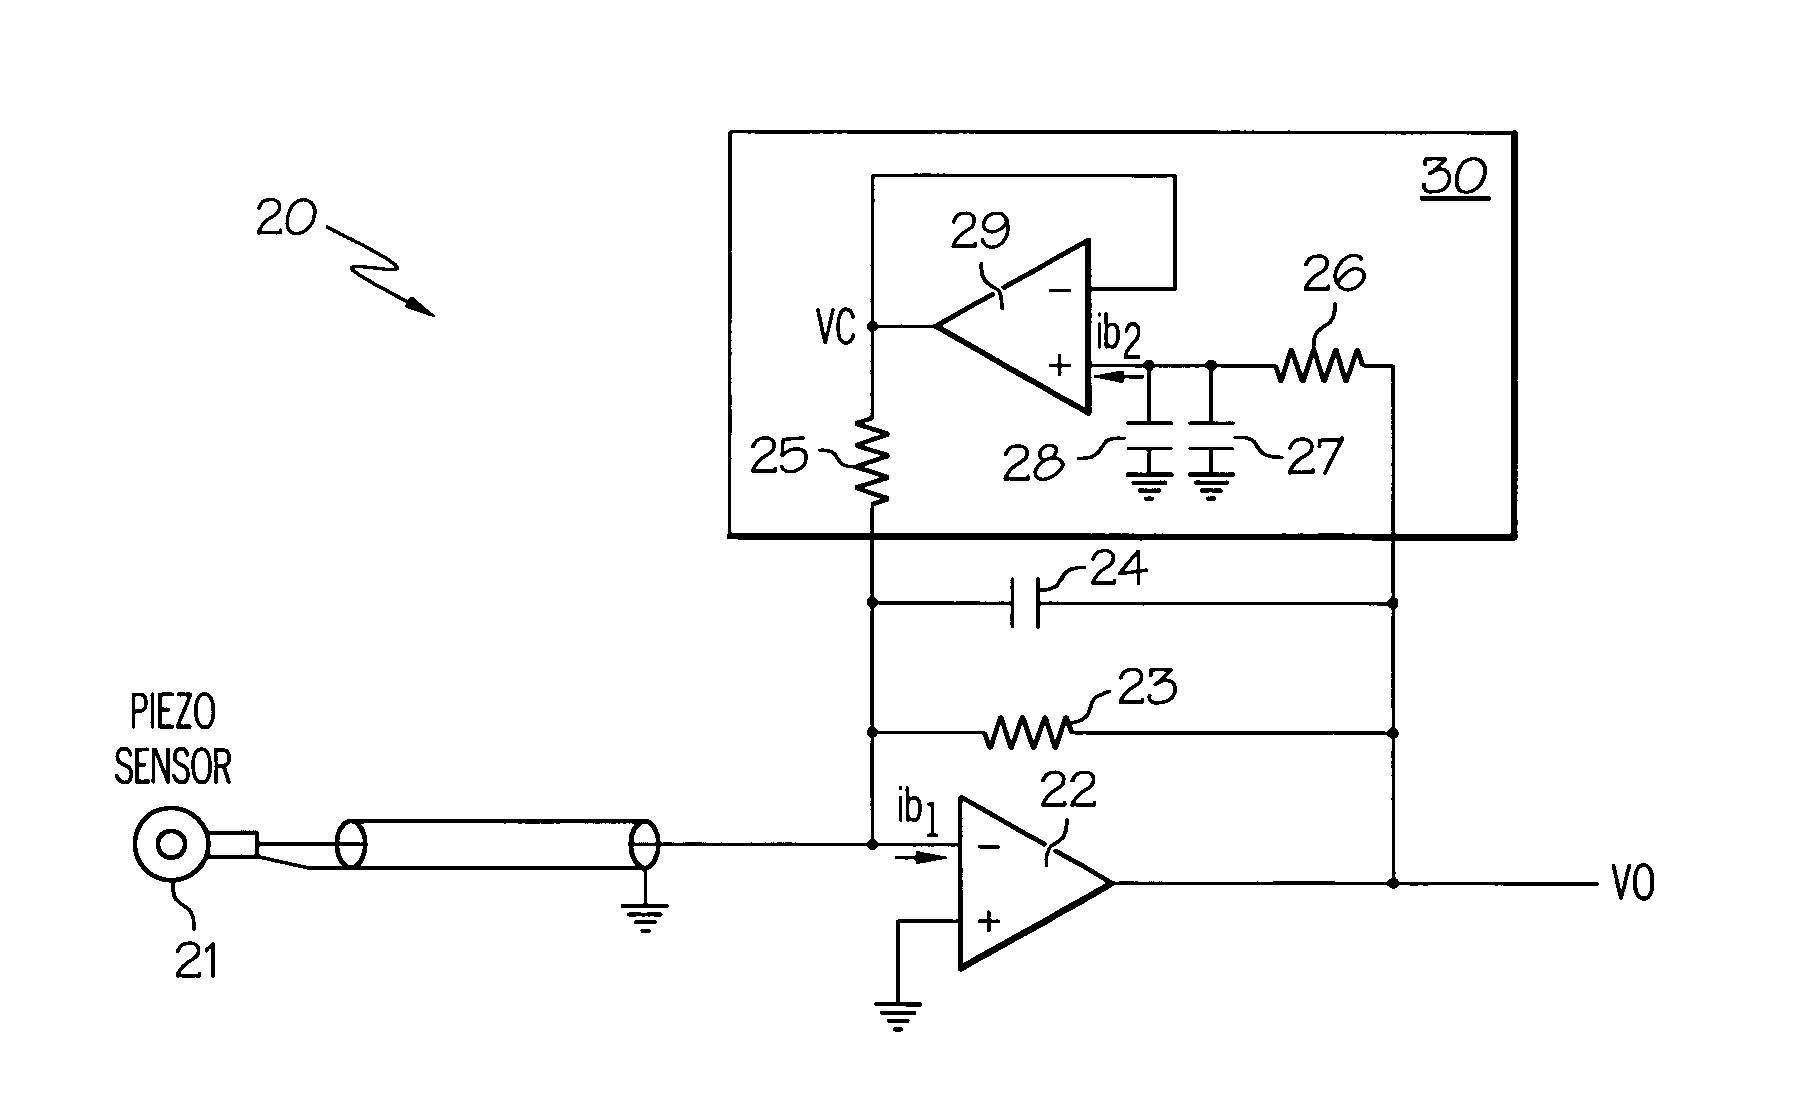 Apparatus for reducing offset voltage drifts in a charge amplifier circuit